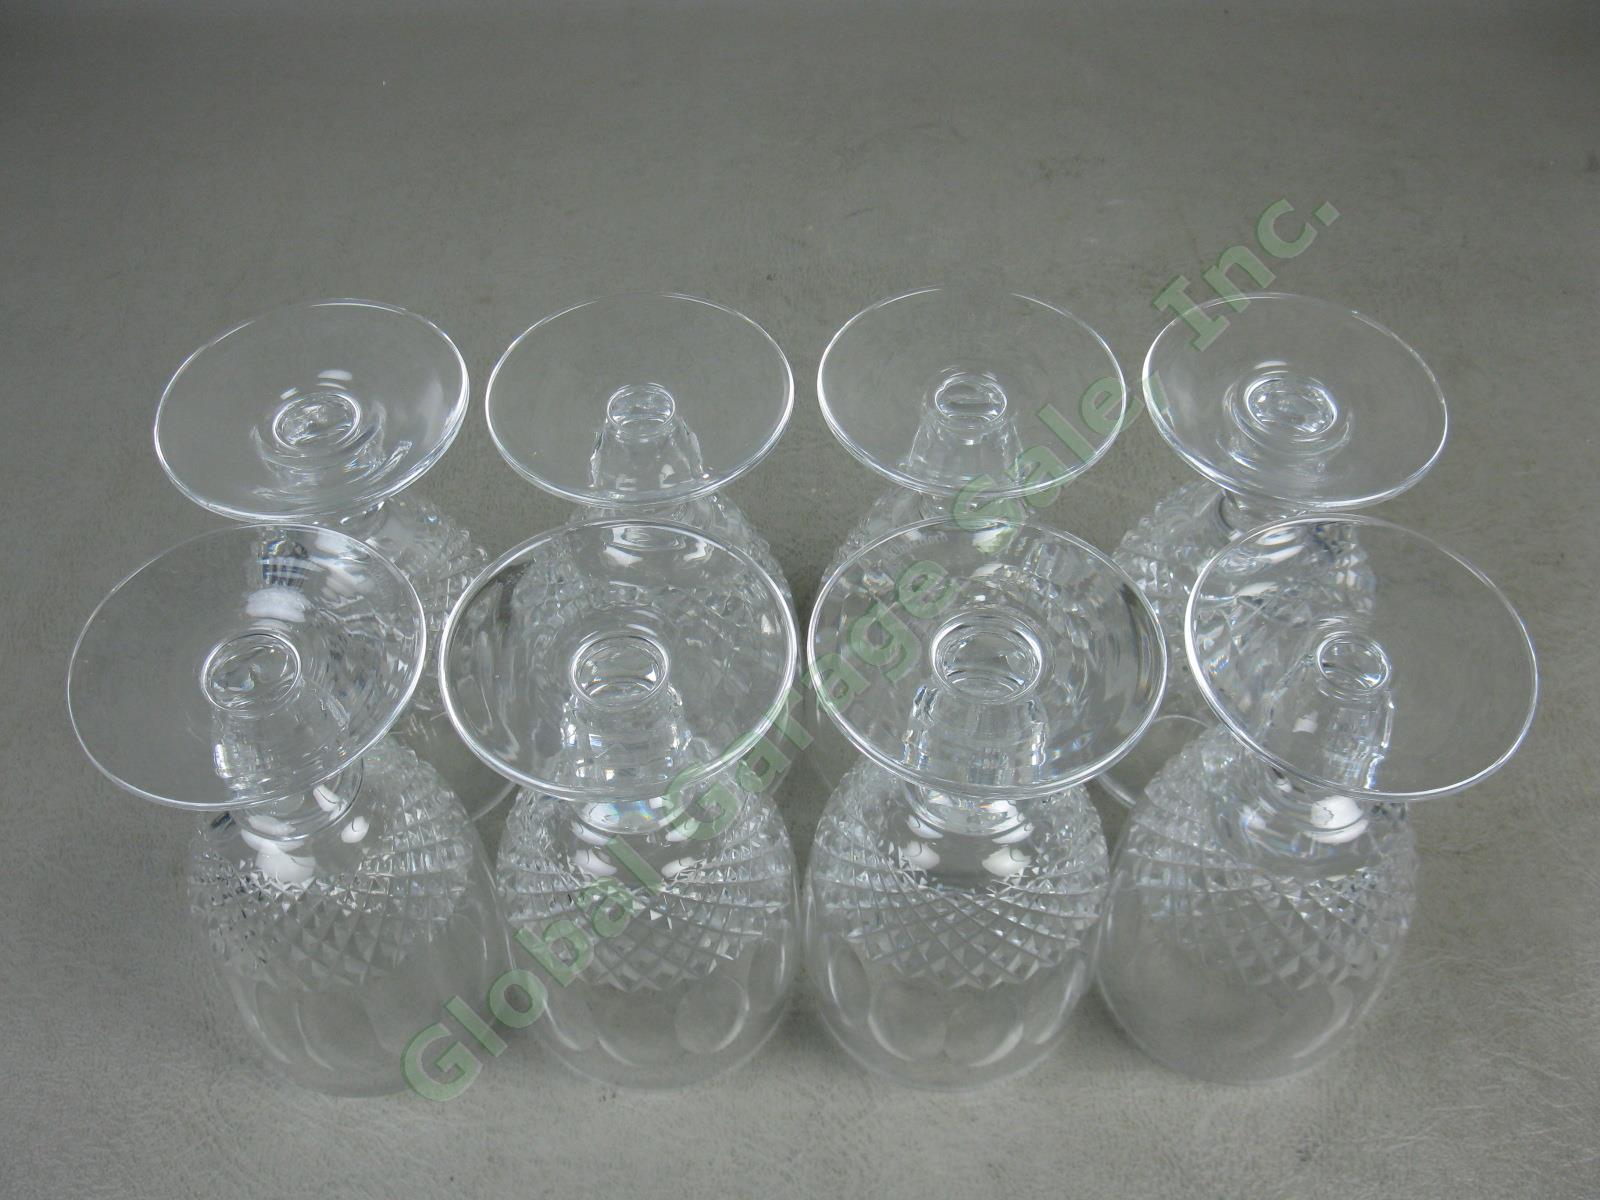 8 Waterford Cut Lead Crystal Colleen Claret Red Wine Glasses Set Lot 4-3/4" Tall 2